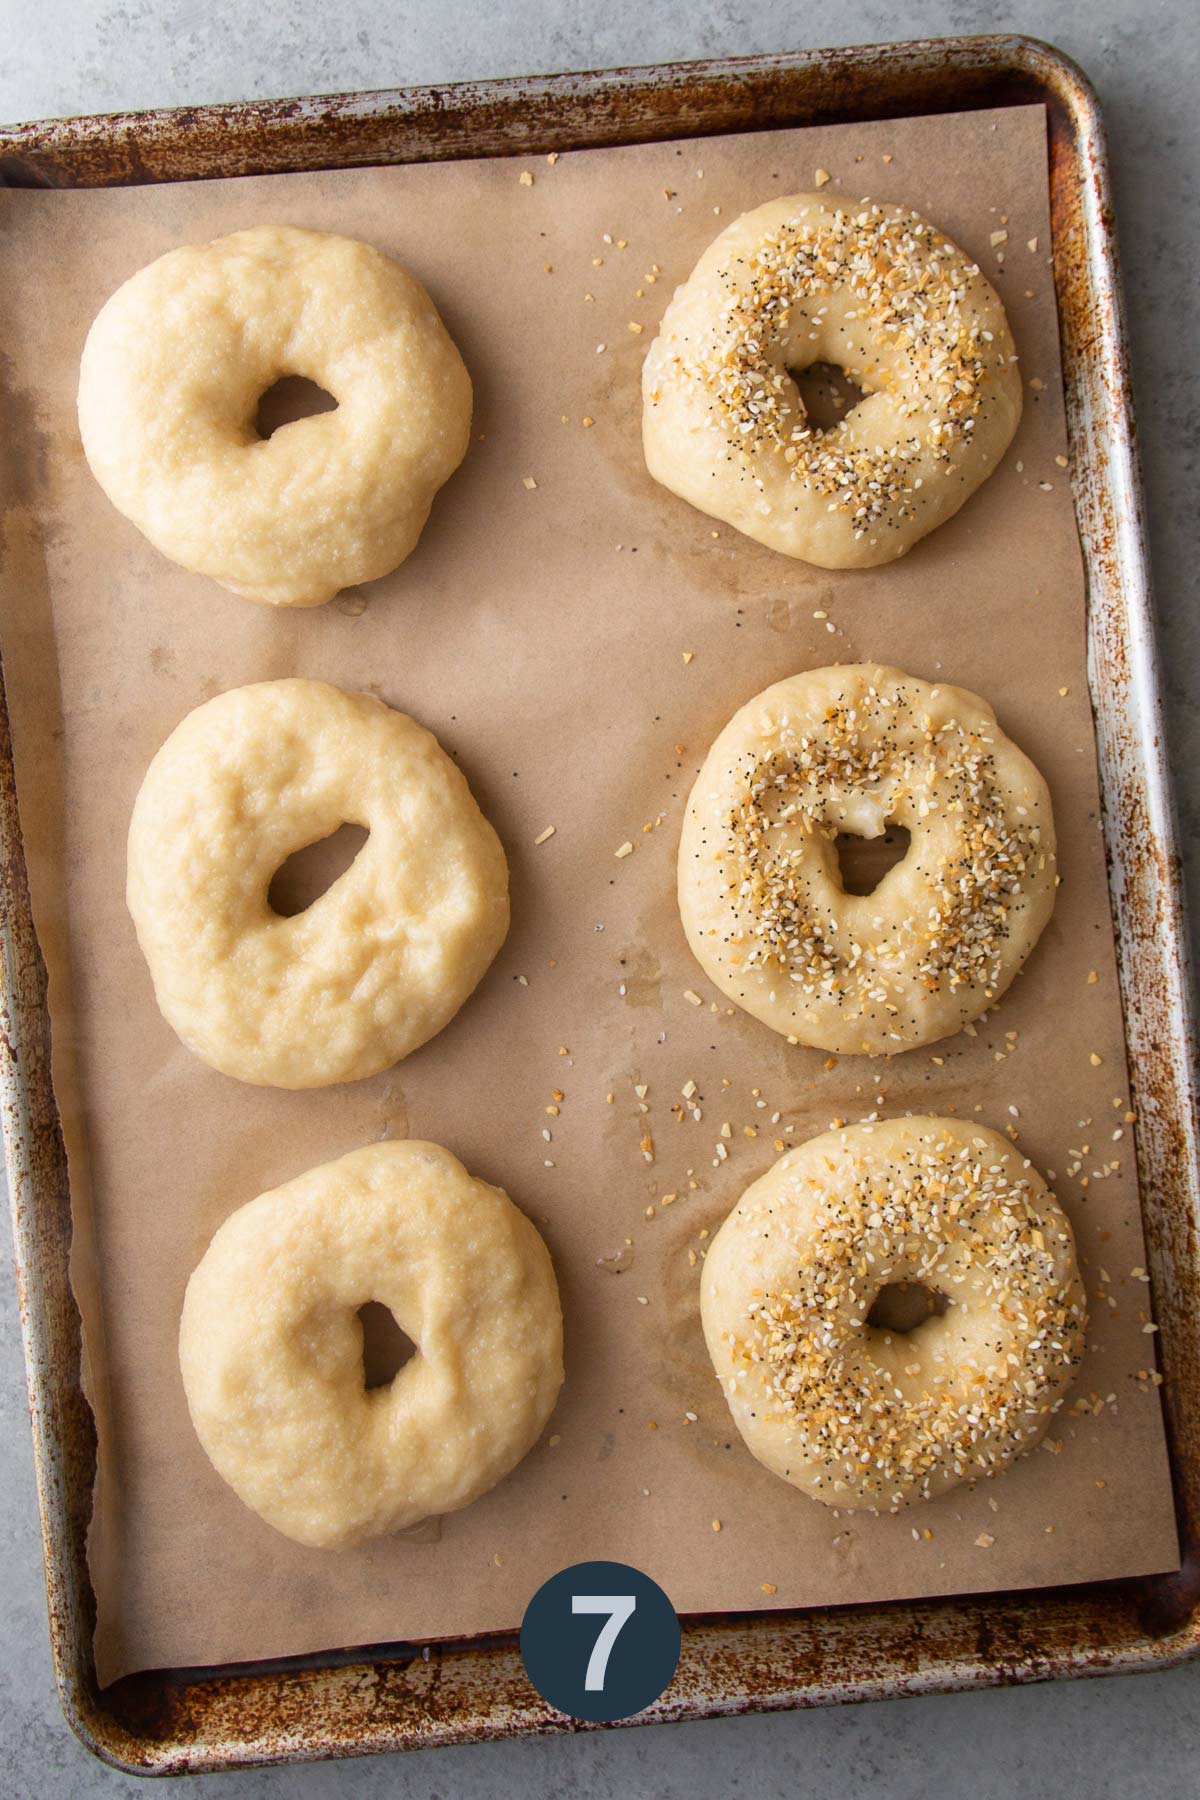 keep bagels plain or brush with egg white and sprinkle with toppings.